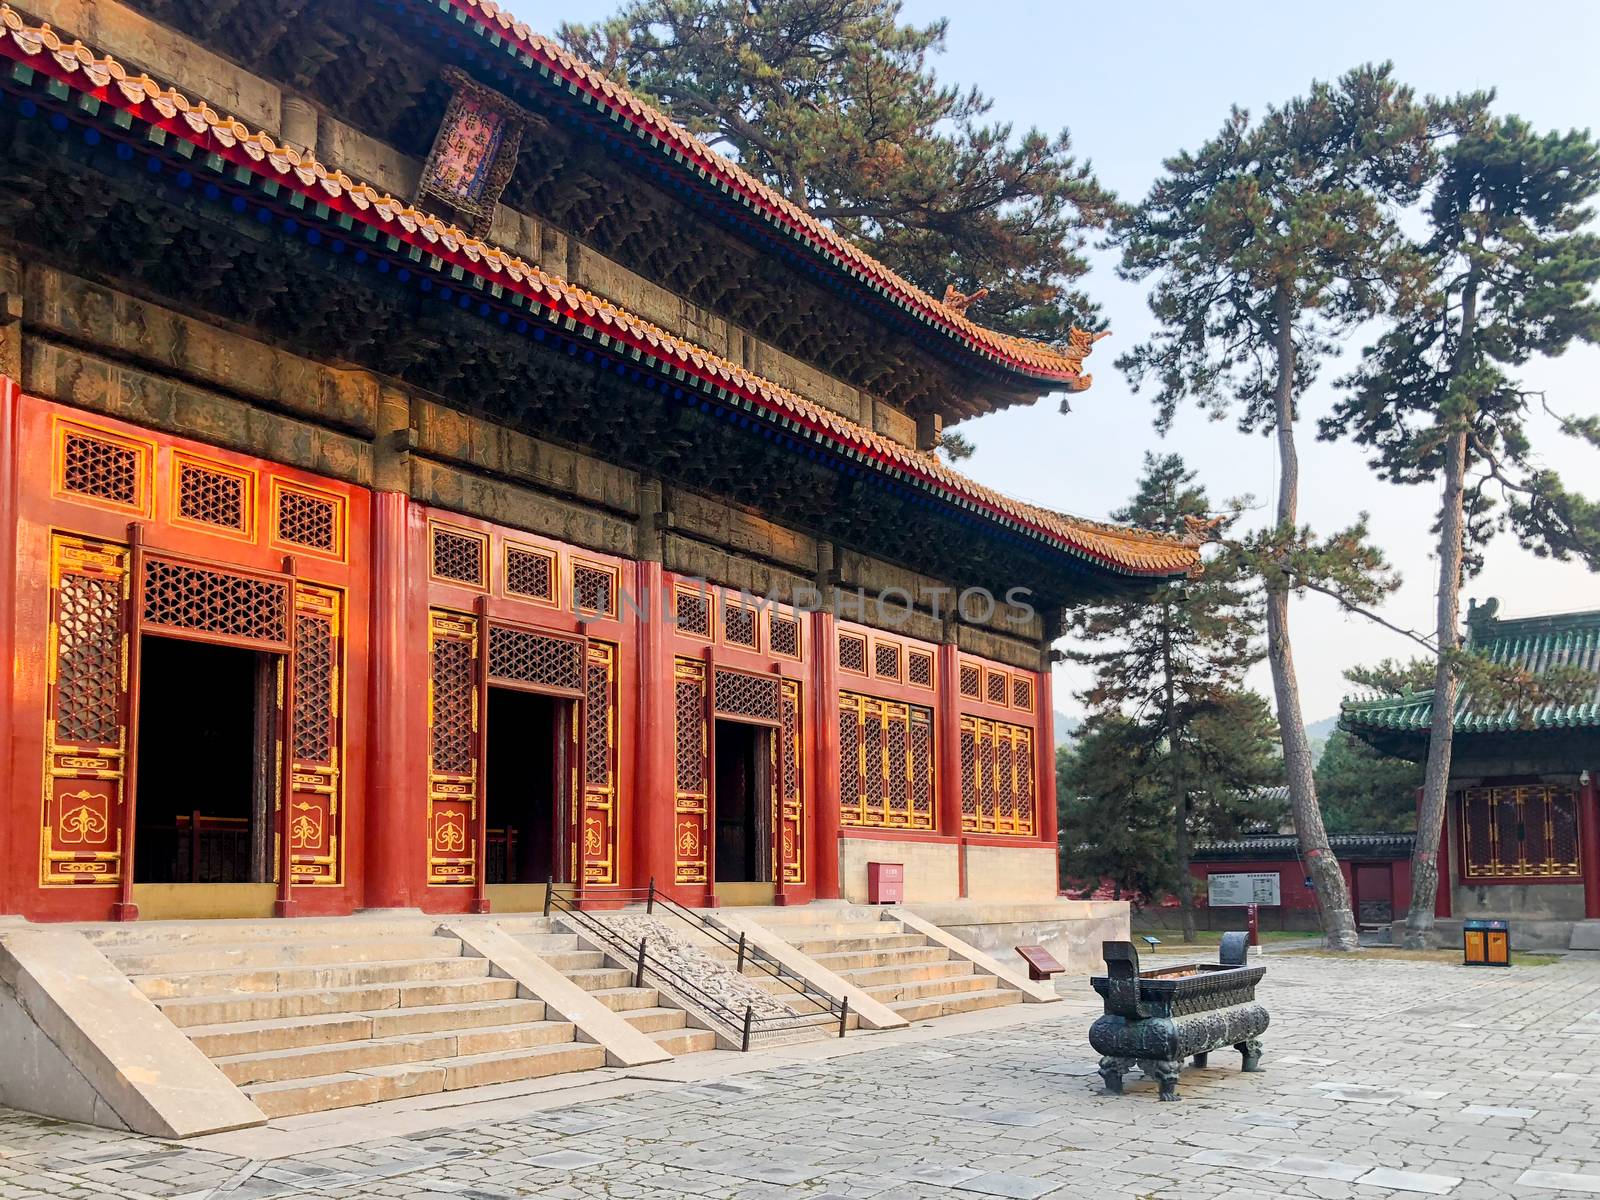 The Temple of Universal Happiness, Pule si, also called the round Pavillion, this structure was built in 1766. Little temple at the starting point for hammer rock hike, Chengde, China.